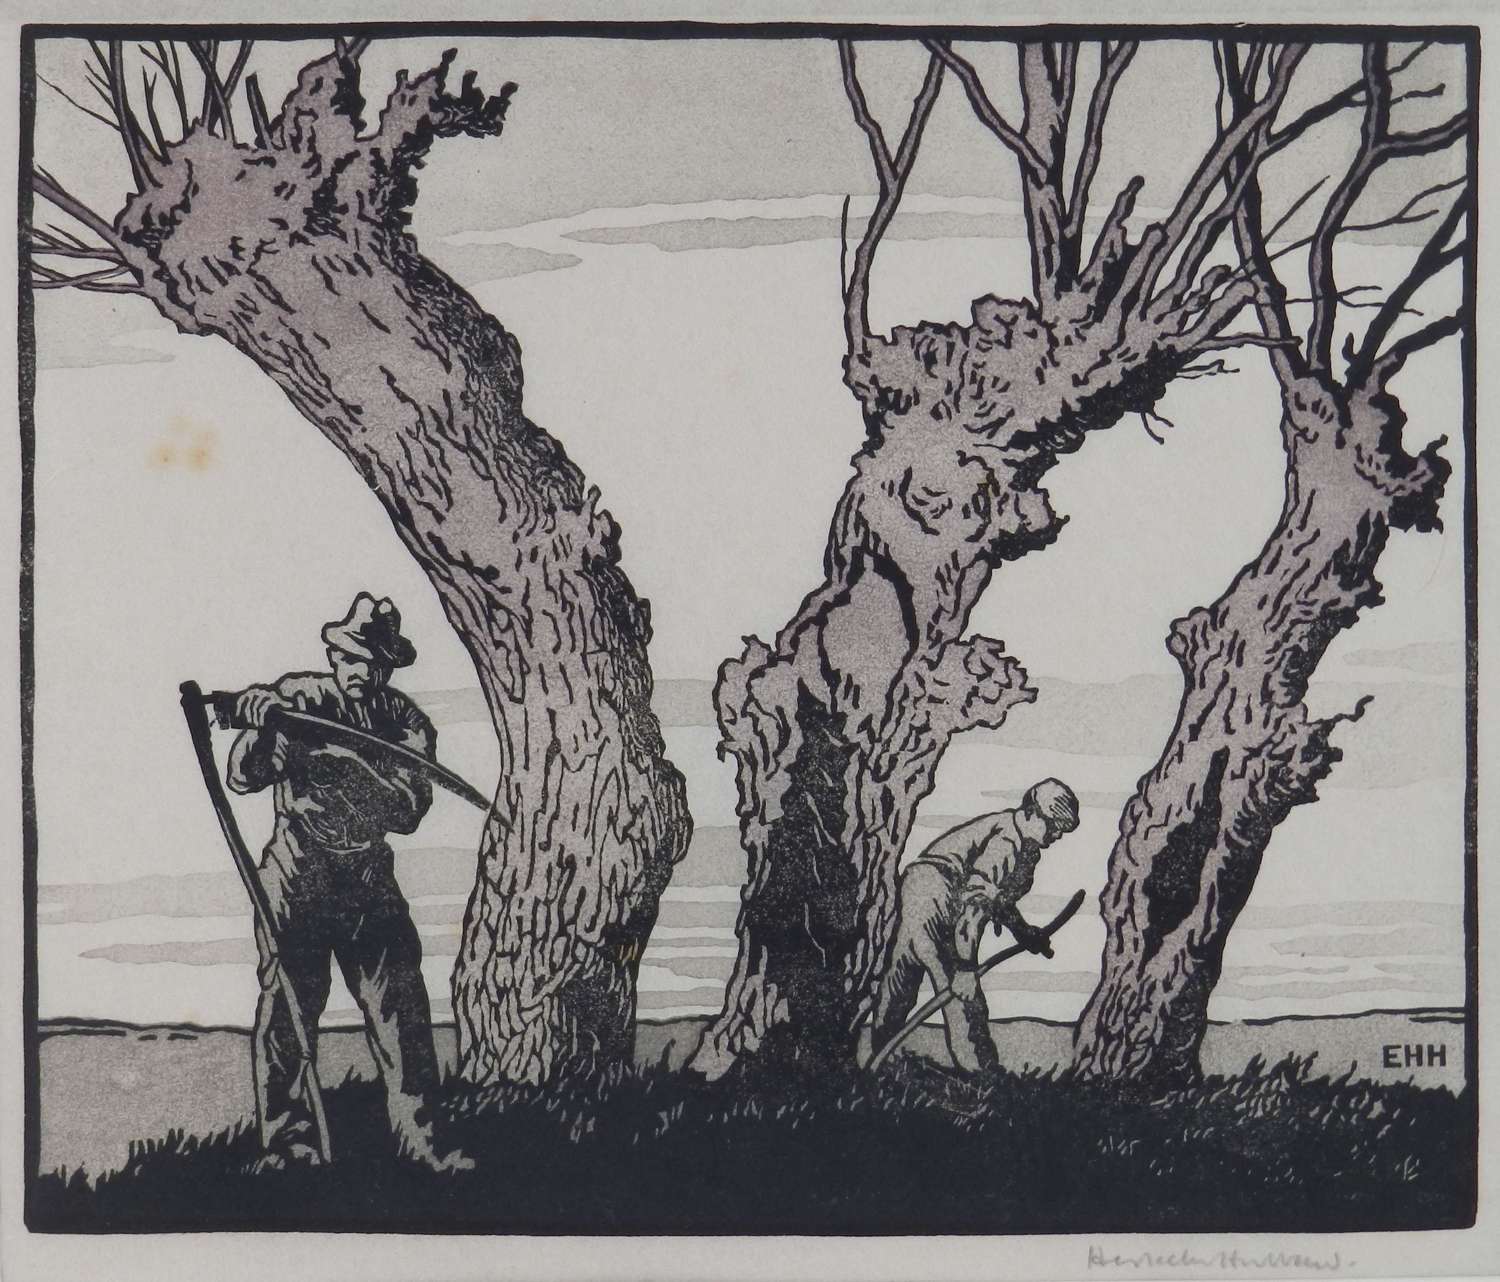 Hay Cutters by Eric Hesketh Hubbard Woodcut